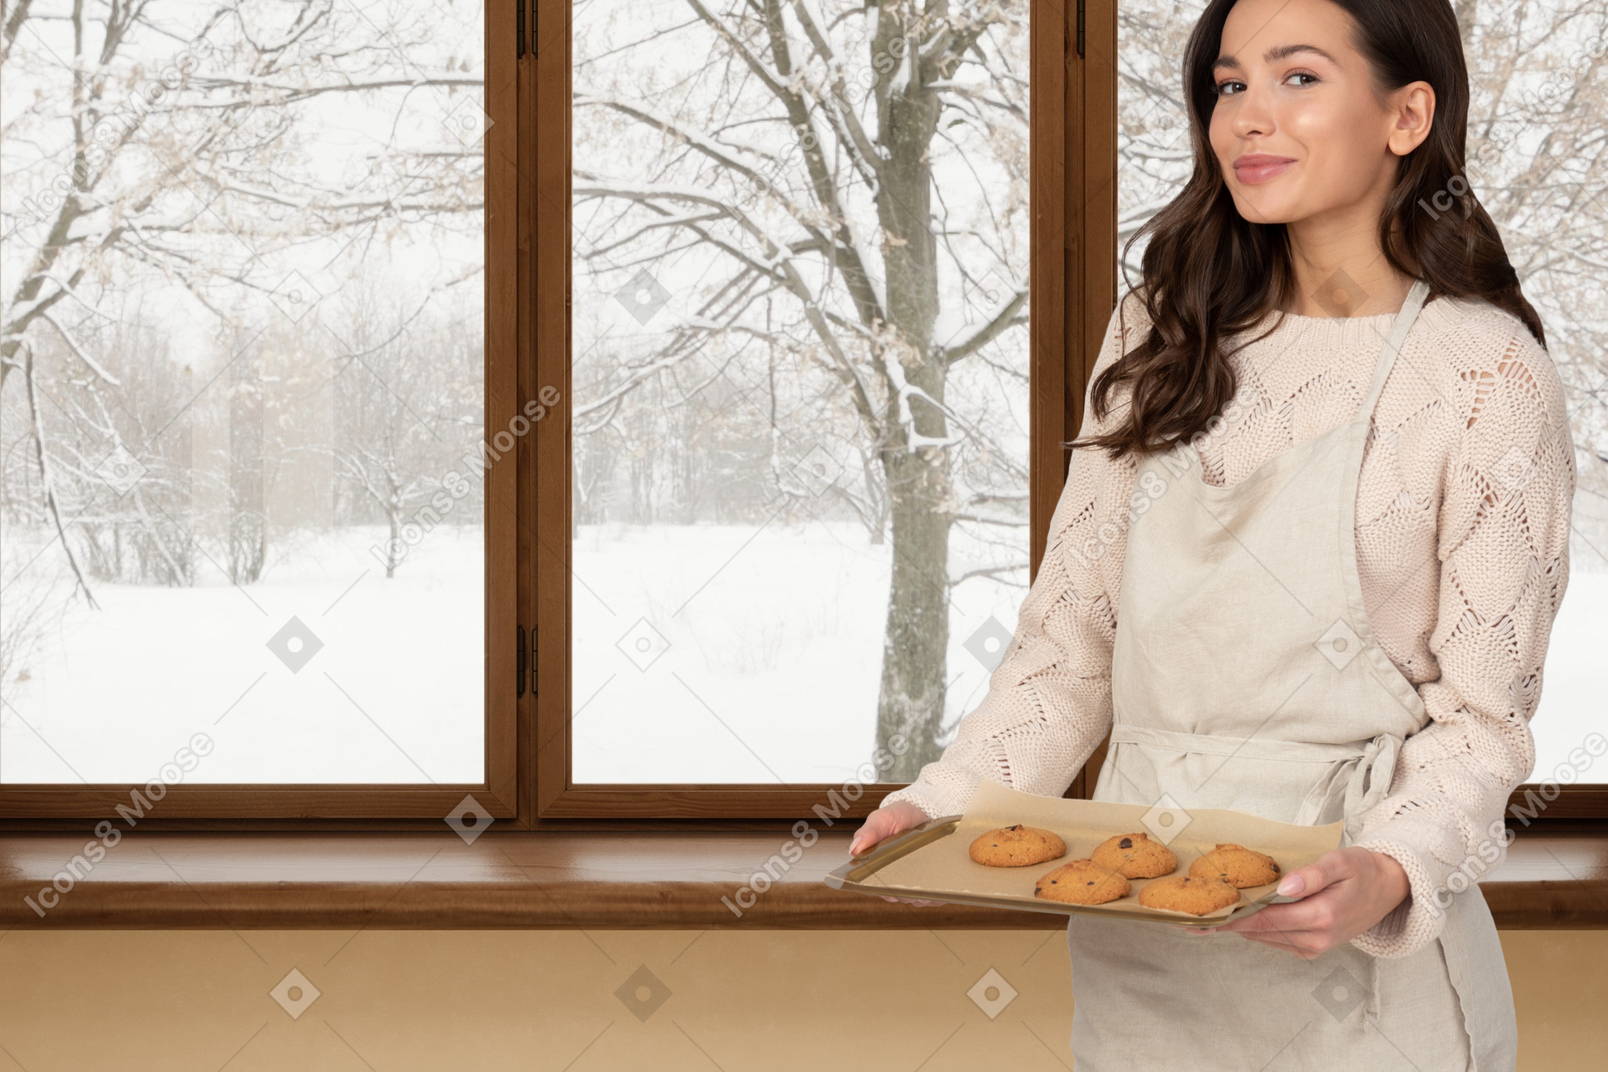 A woman holding a tray of cookies in front of a window